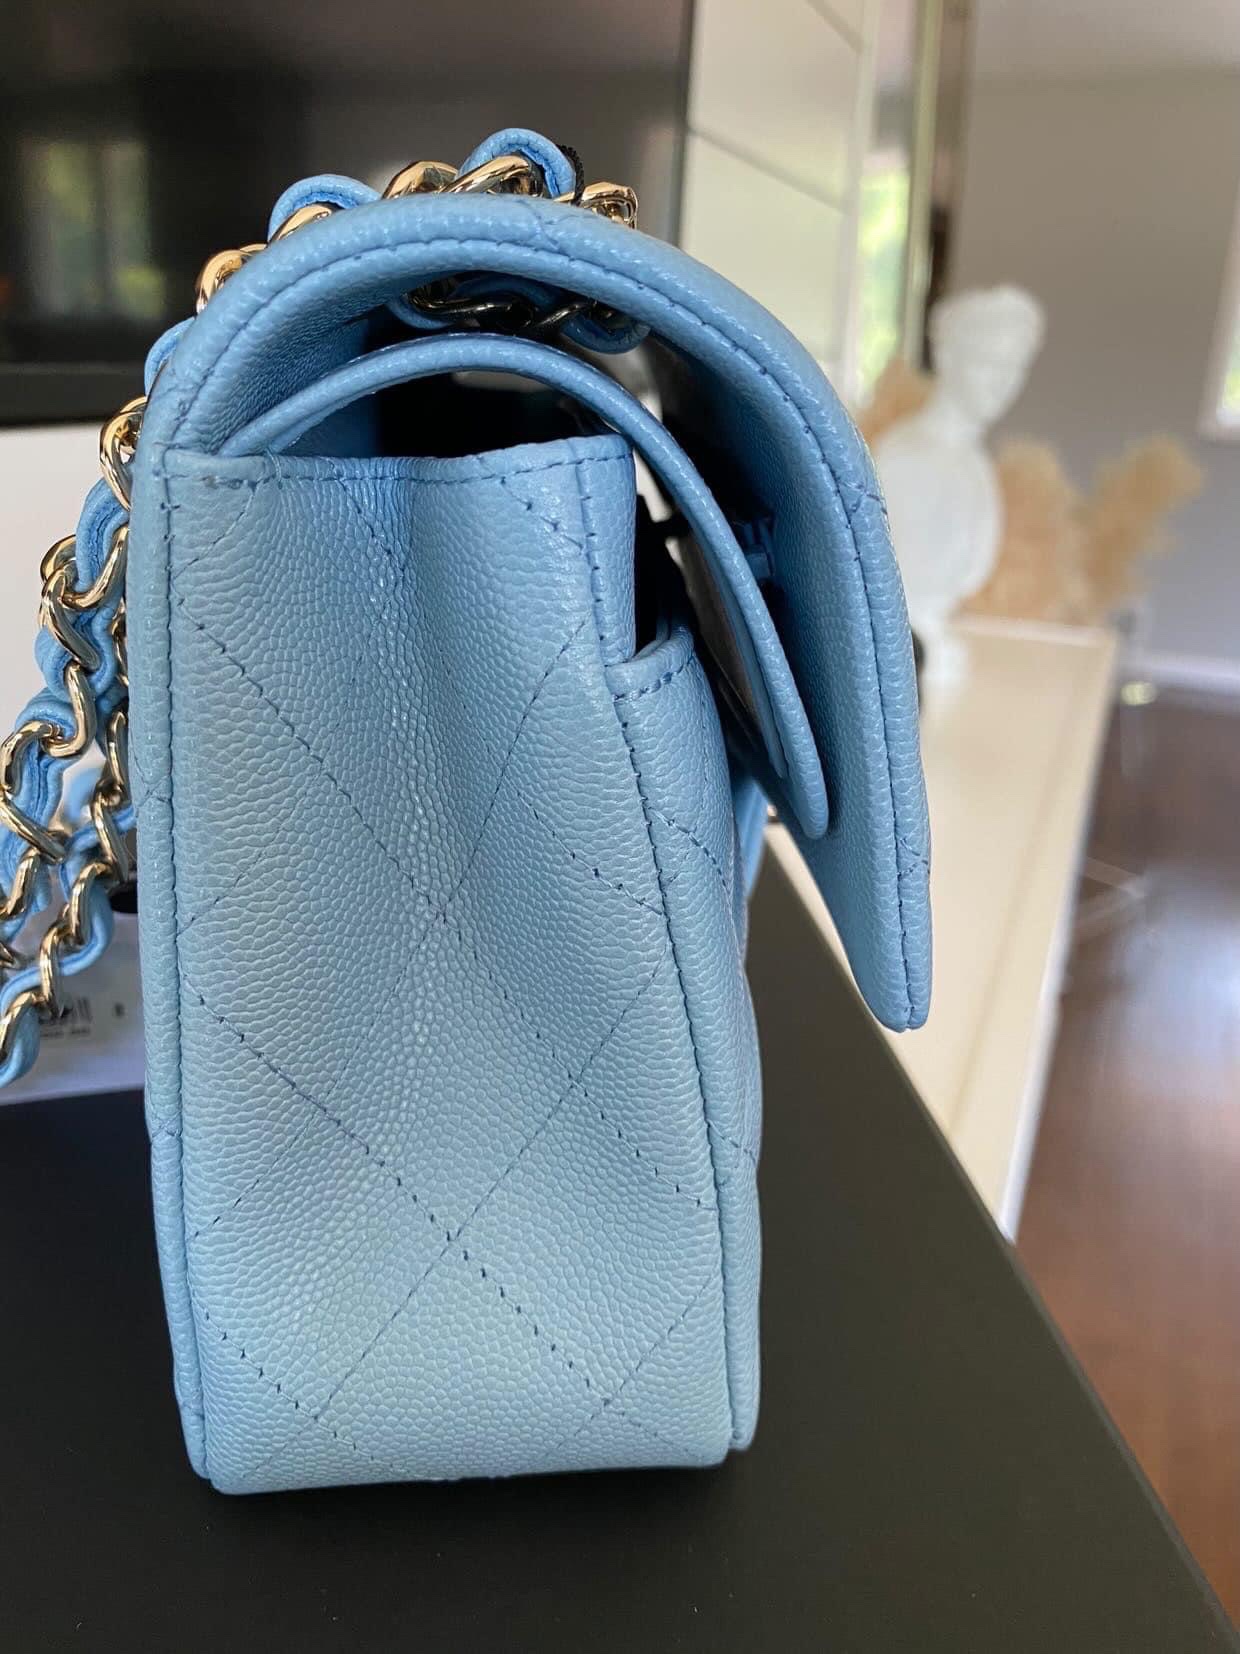 BN AUTHENTIC CHANEL CLASSIC SMALL DOUBLE FLAP IN LIGHT BLUE CAVIAR